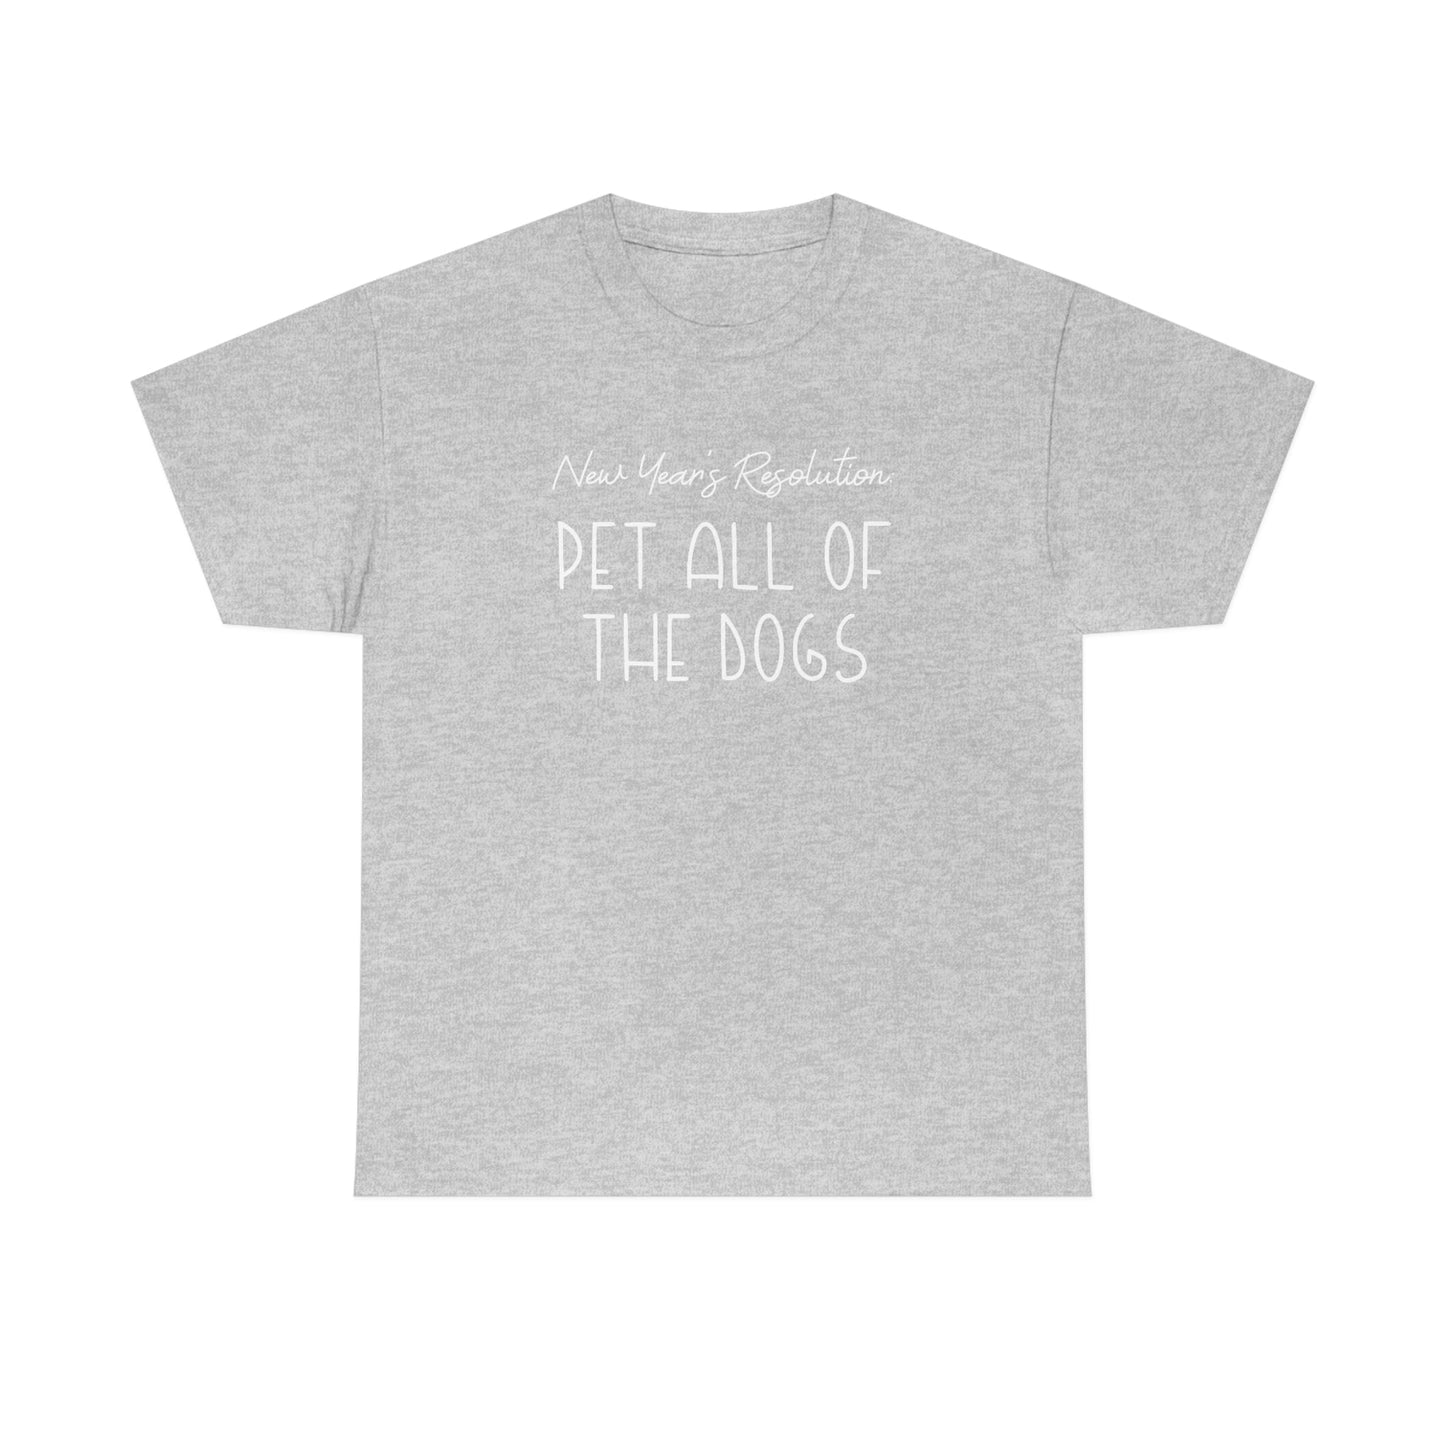 New Year's Resolution: Pet All Of The Dogs | Text Tees - Detezi Designs-29341592664864484659